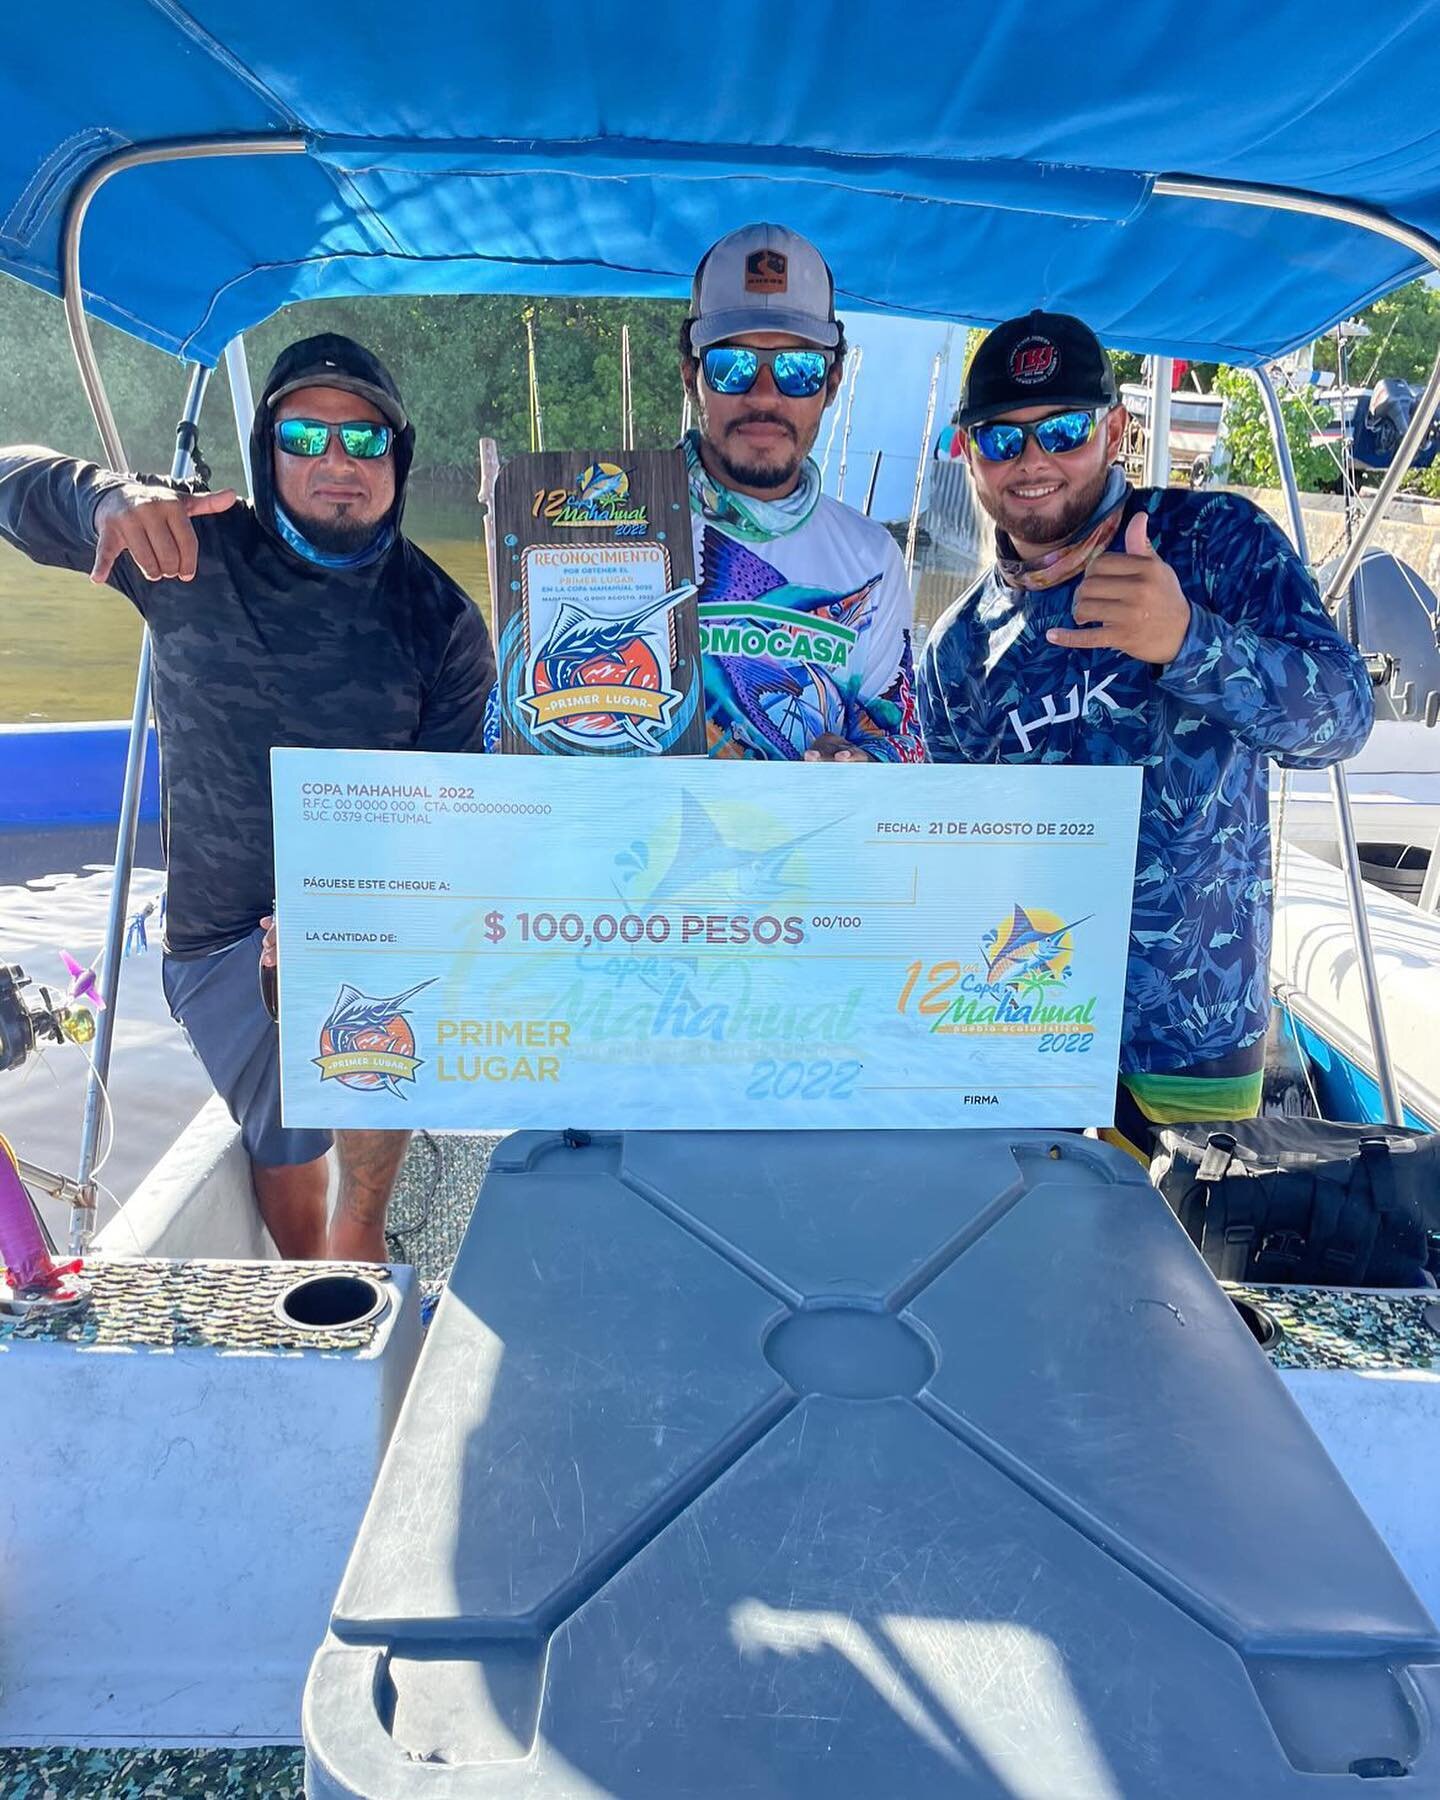 Belize with the Win for the 12th Copa Mahahual Fishing Tournament! #MadSpread @copamahahual